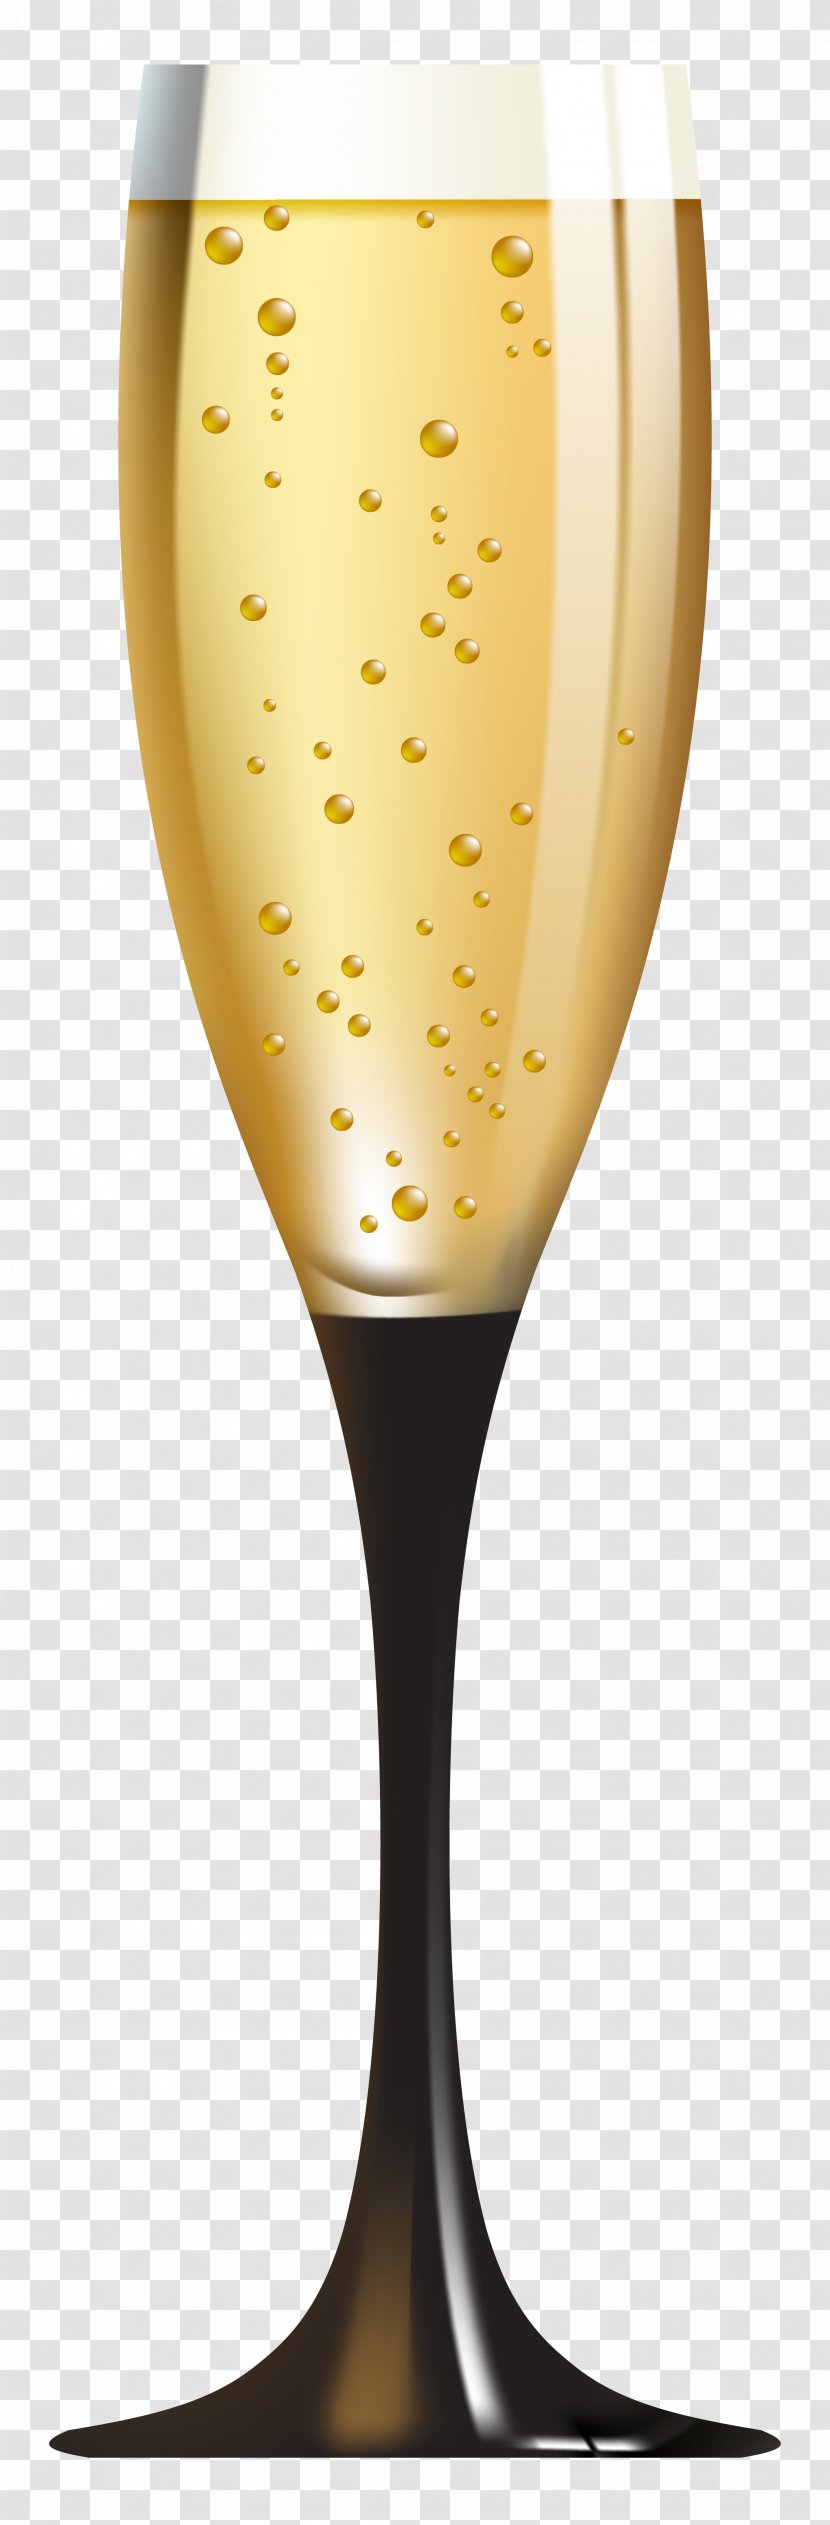 White Wine Champagne Glass Cocktail - Transparent Images Transparent PNG